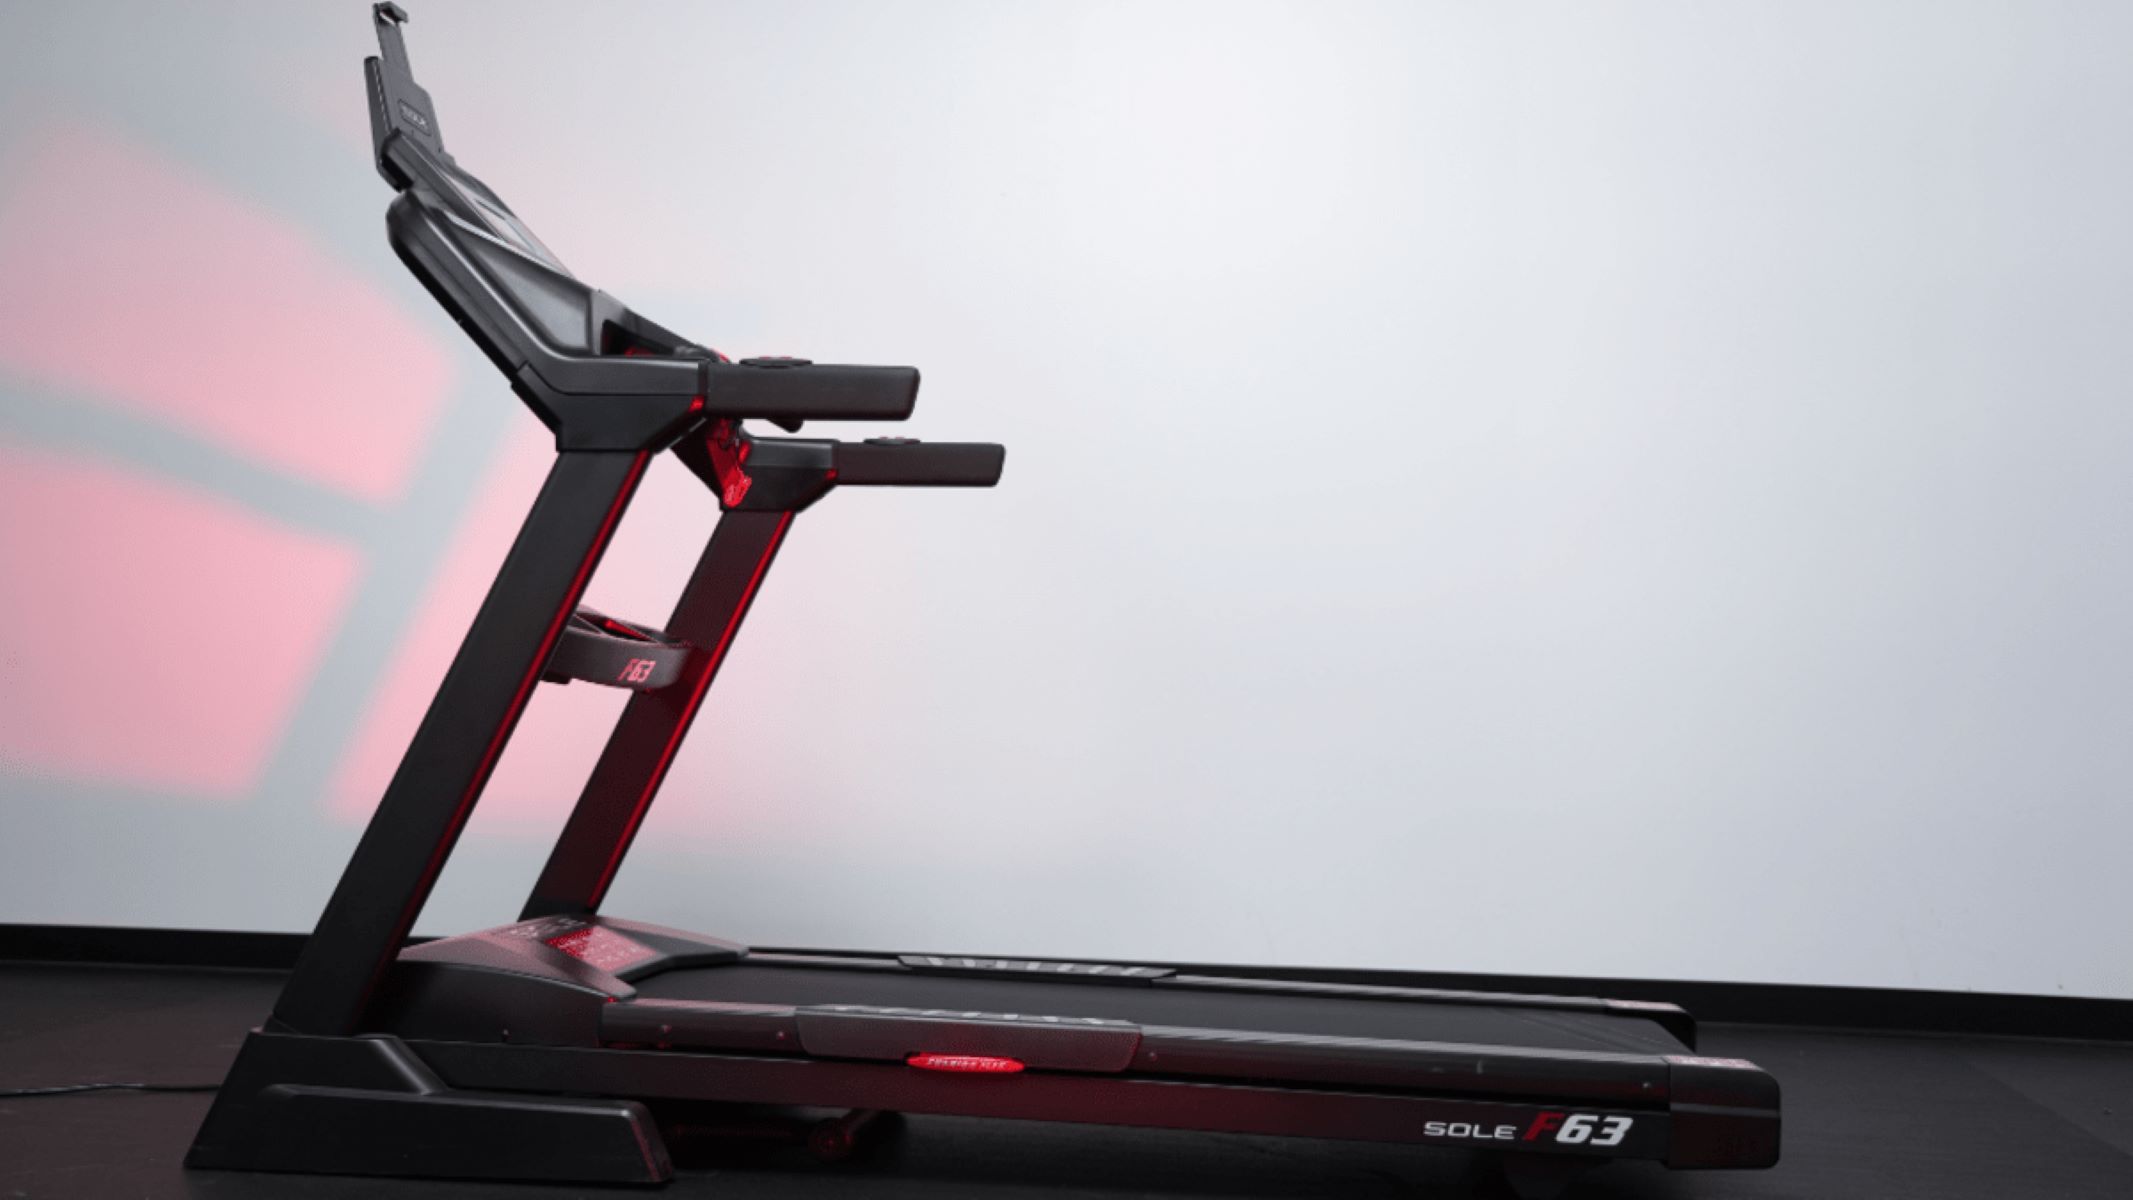 How To Disassemble Sole F63 Treadmill